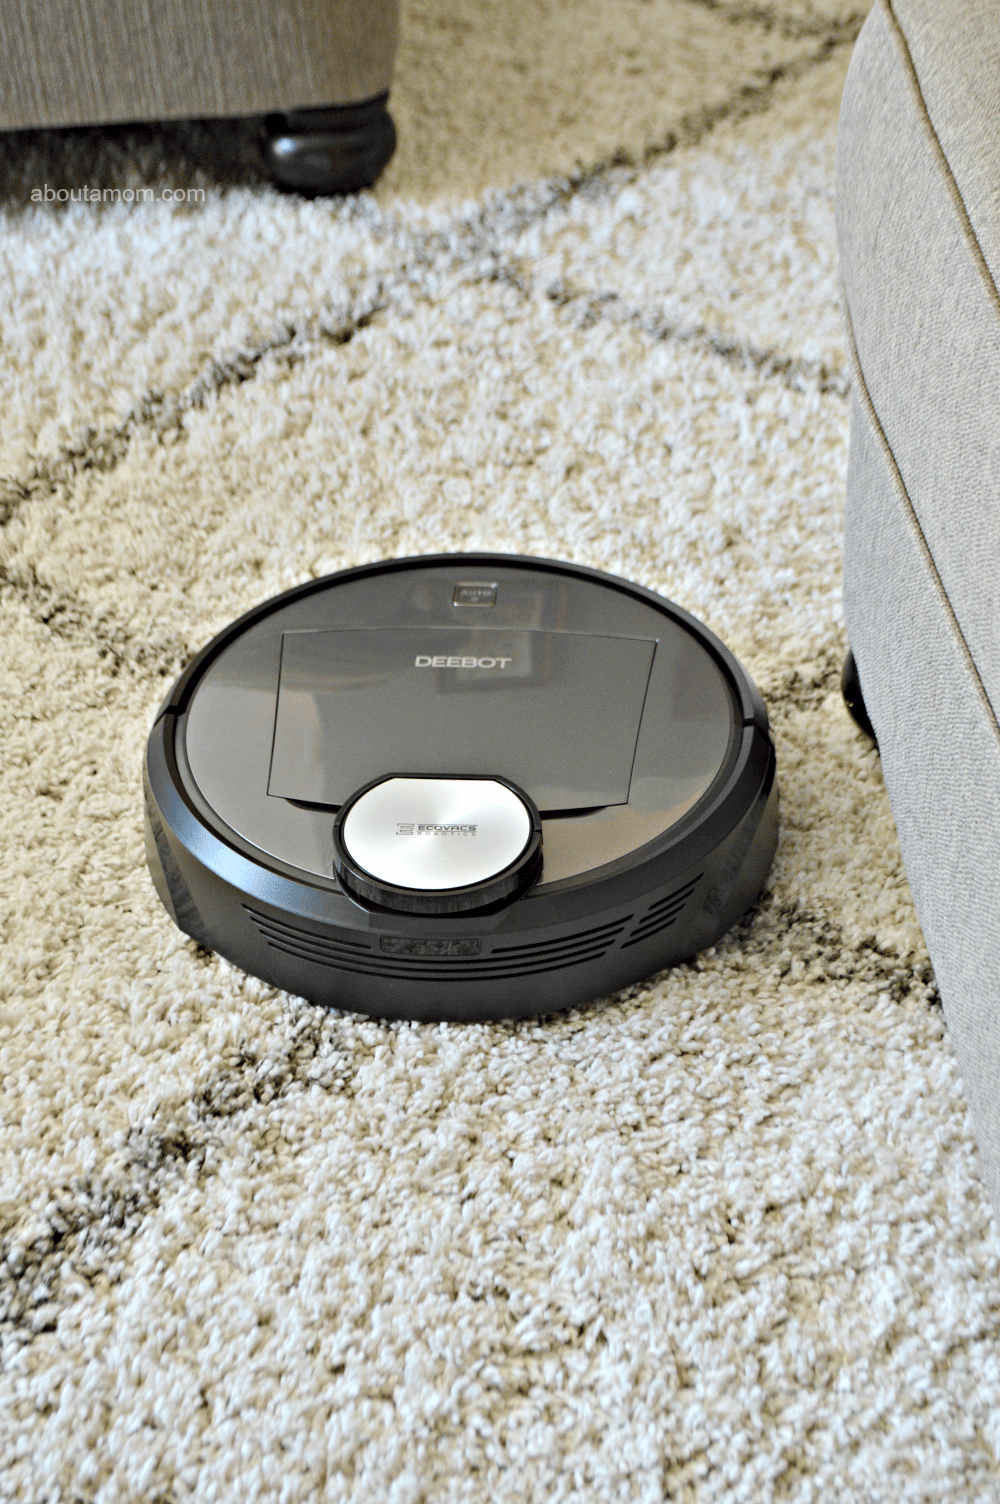 The only thing mom would want more than the R95, would be if you would clean the house everyday for her. Since no one wants to sign up for that, giving her the DEEBOT R95 robot vacuum is the next best choice.